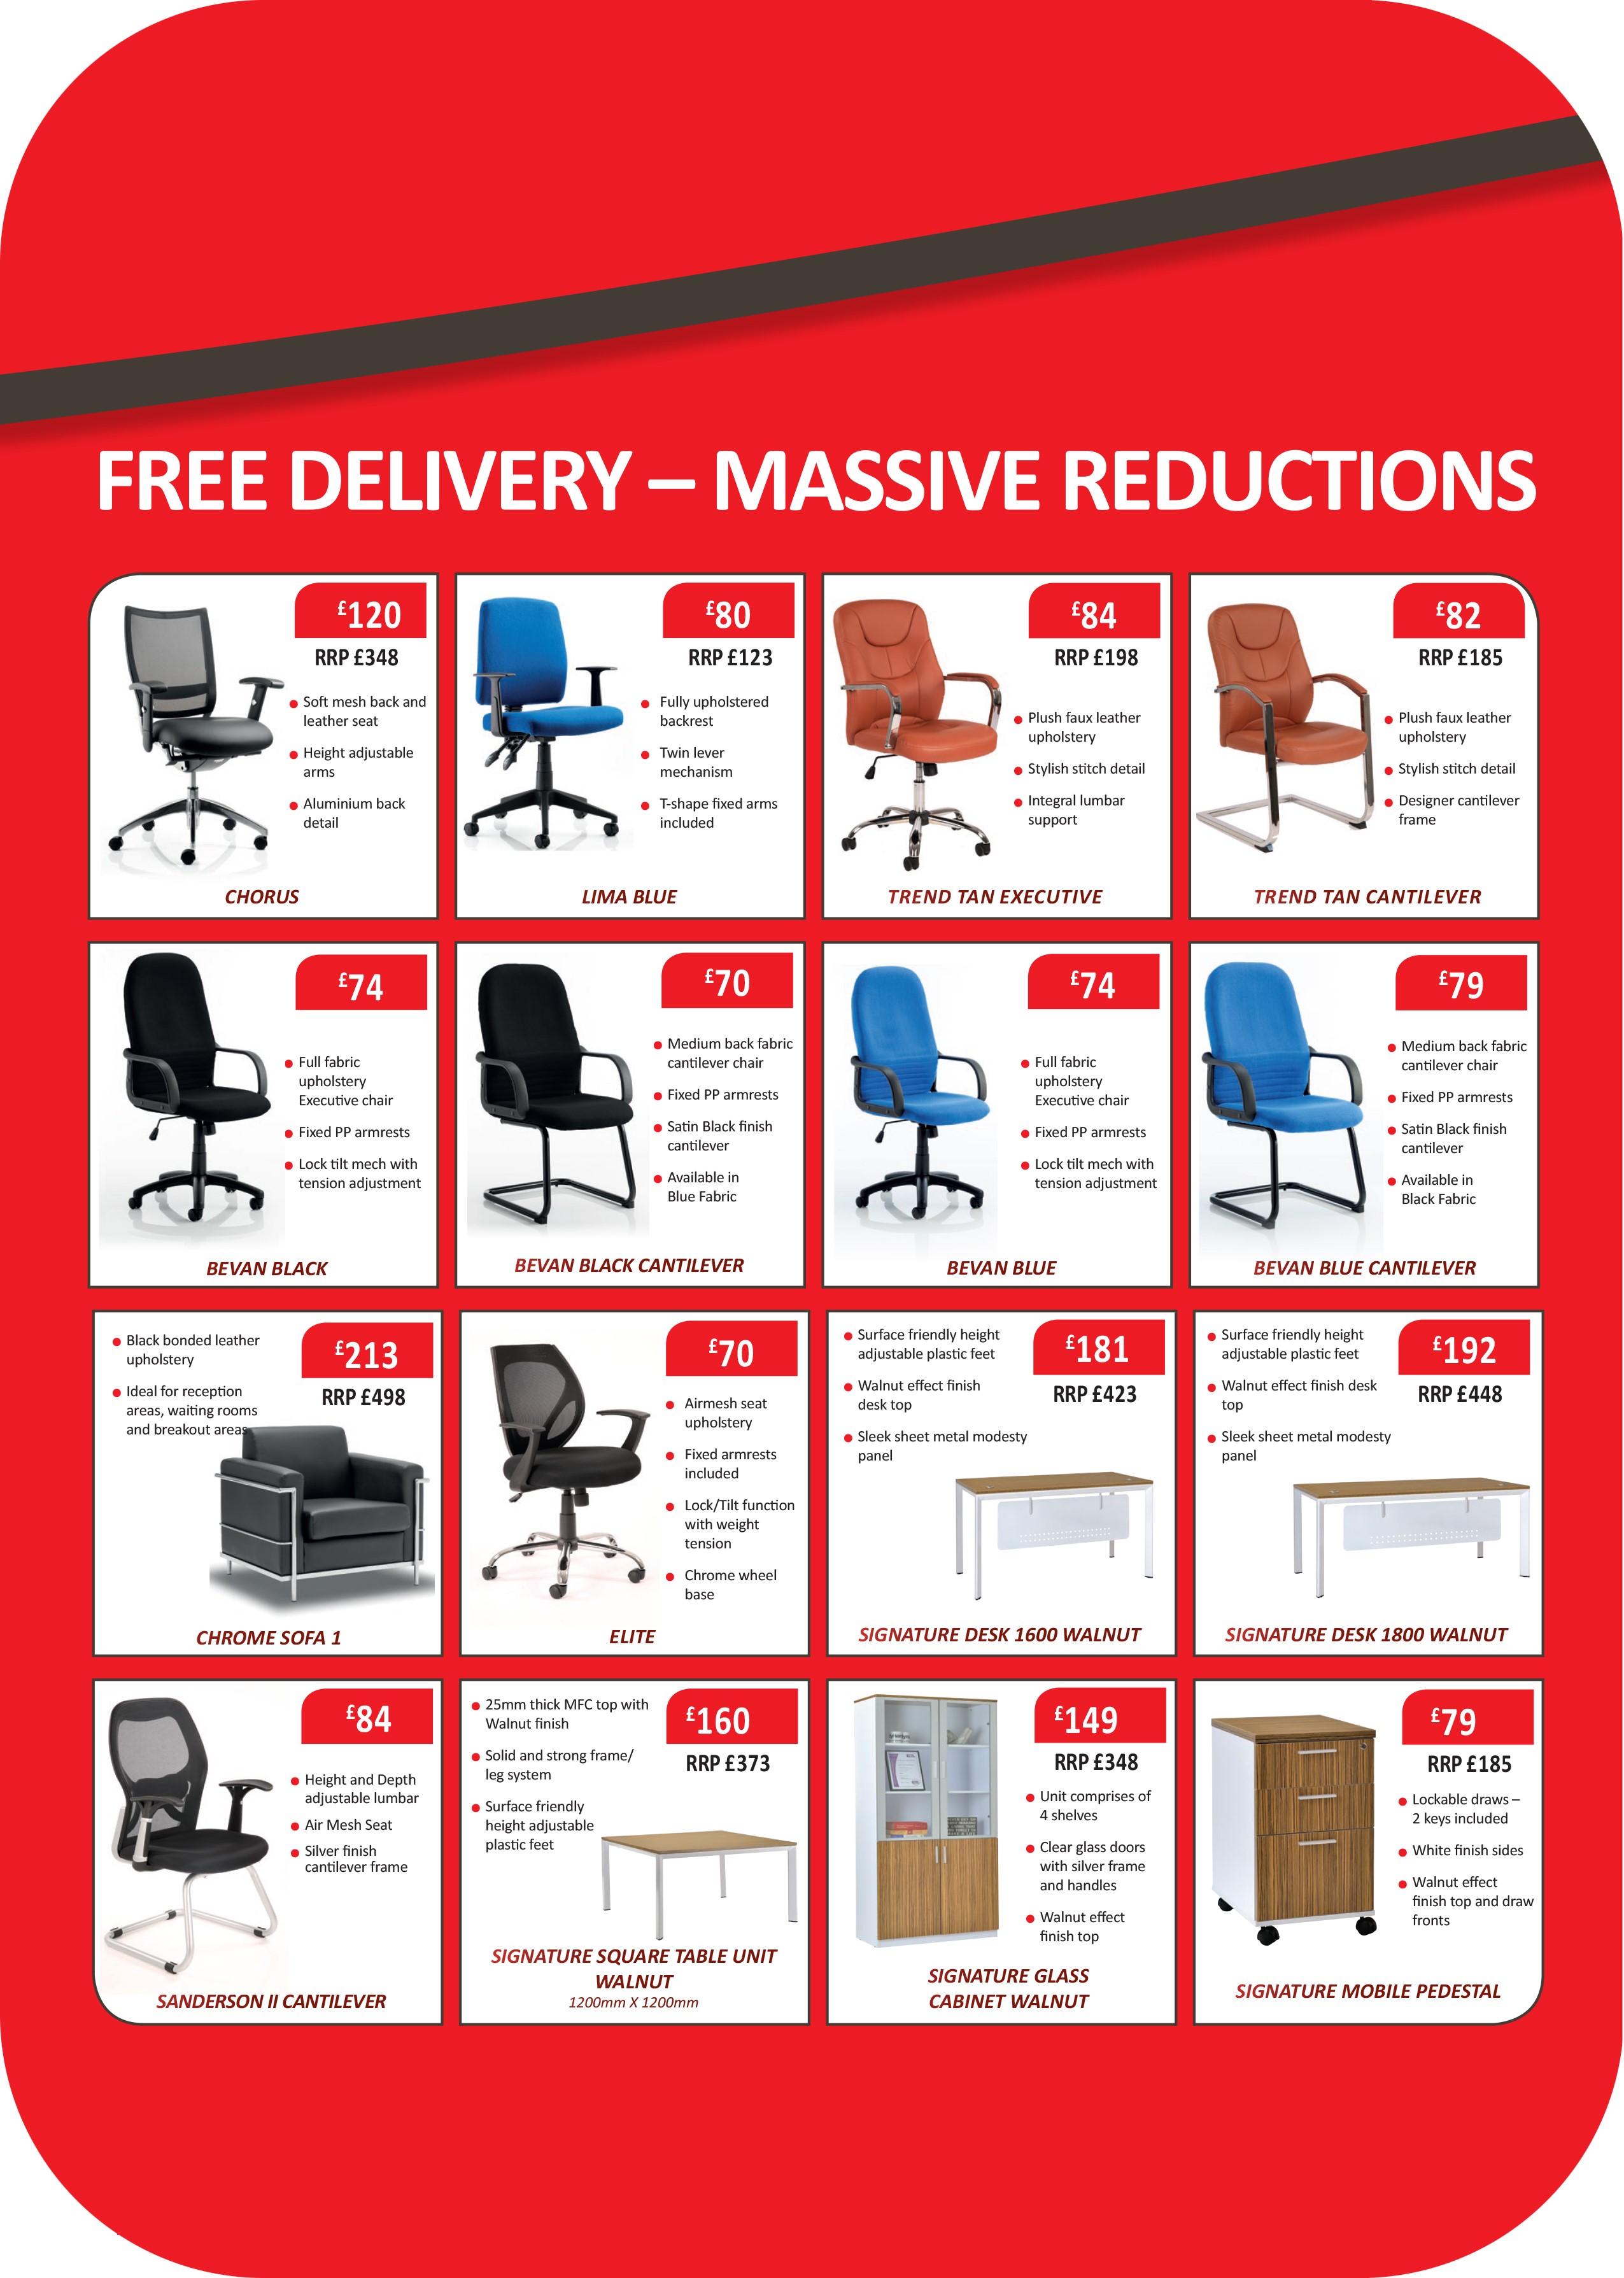 Seating and office furniture Summer 2015